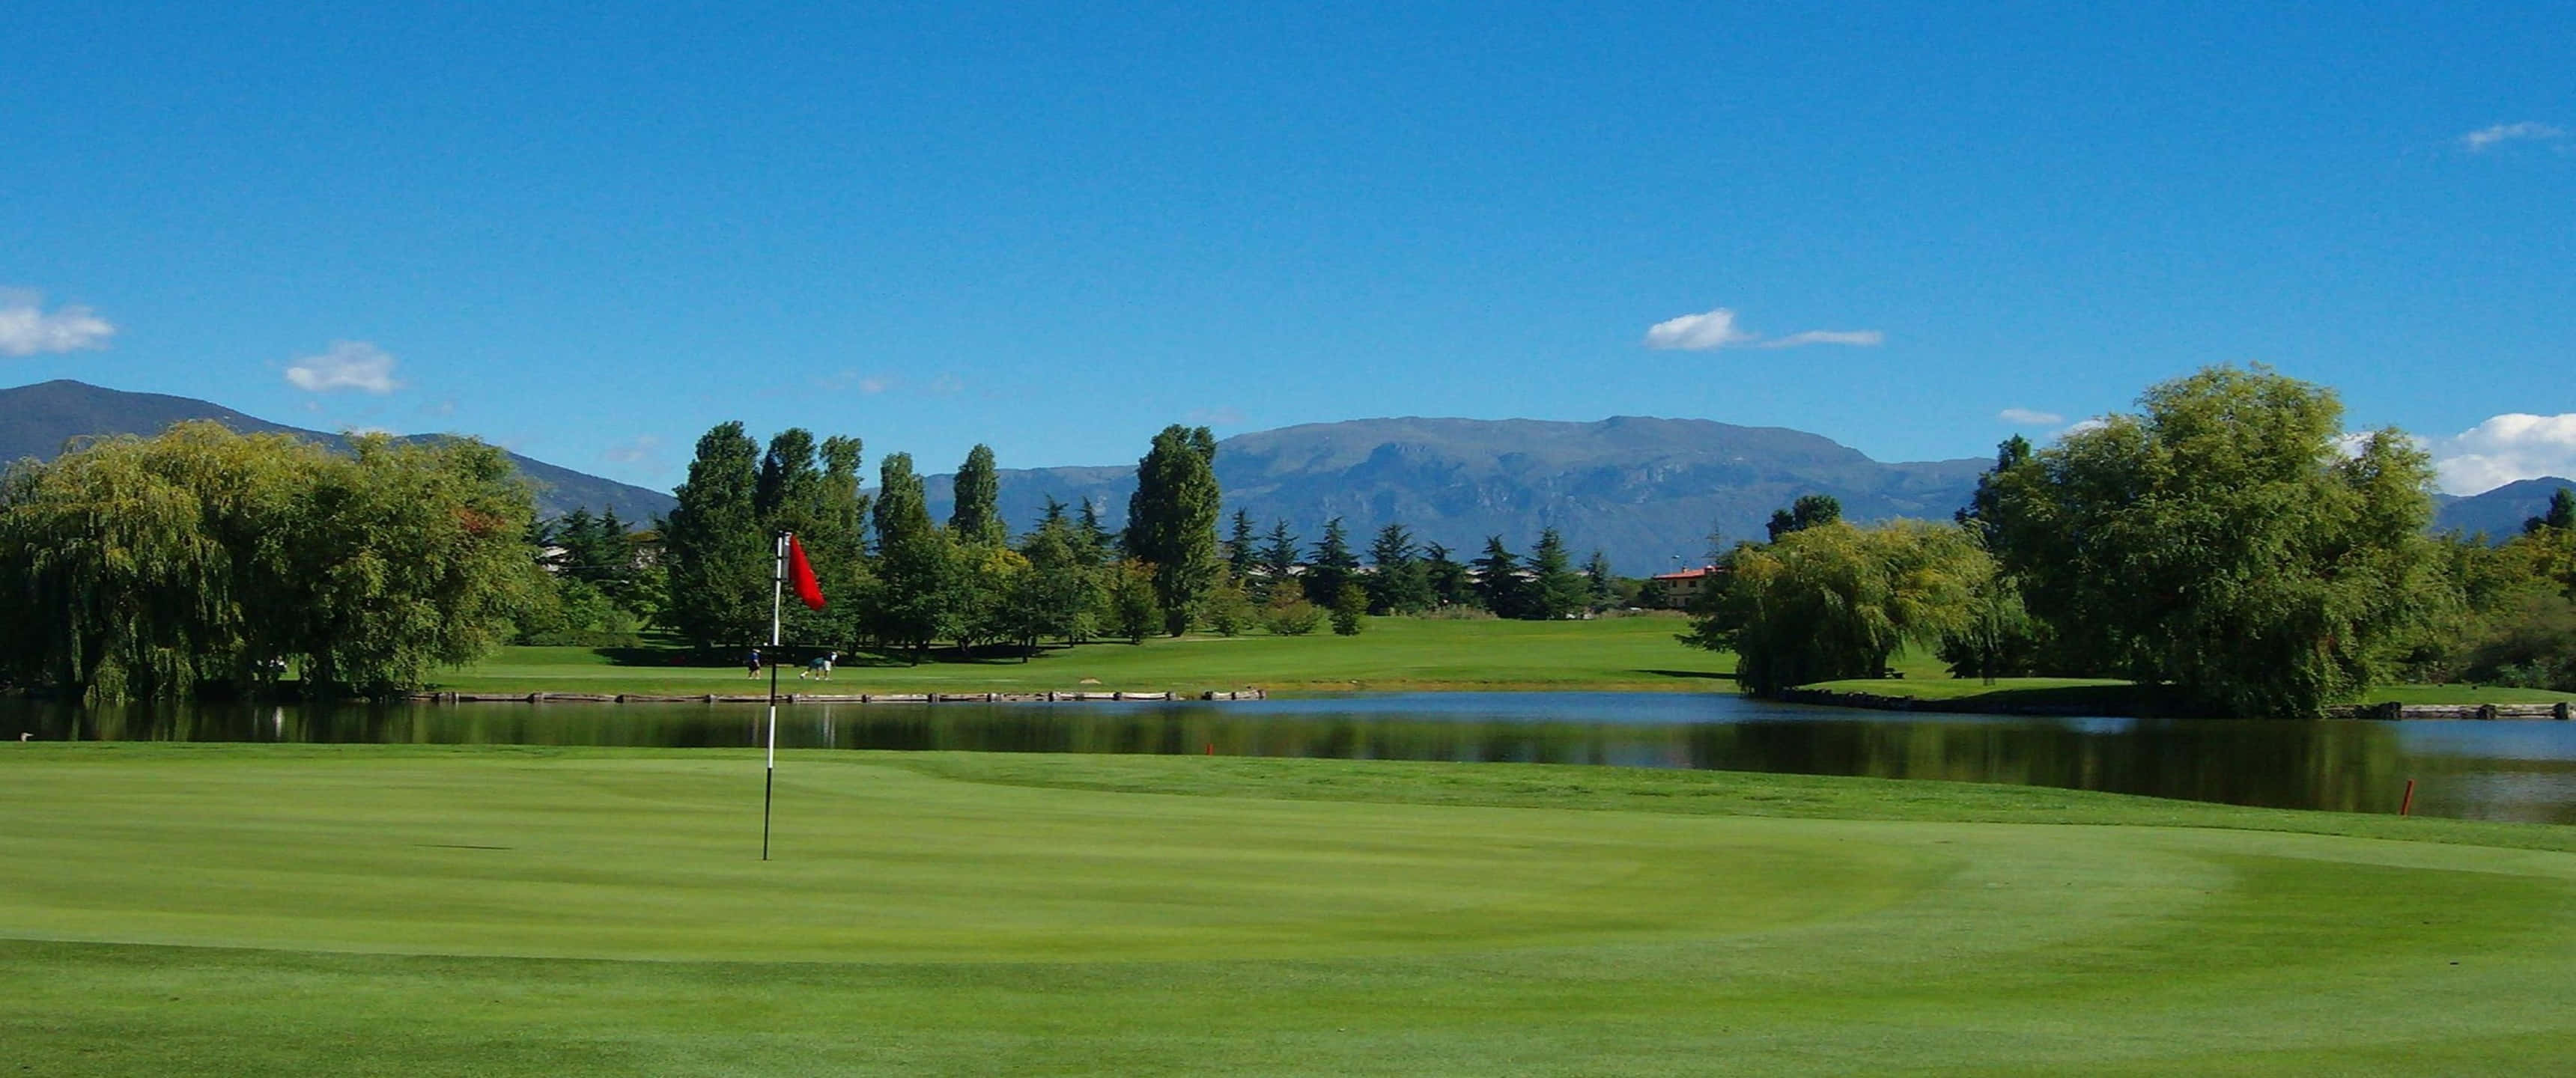 Franciacorta 3440x1440p Golf Course Background